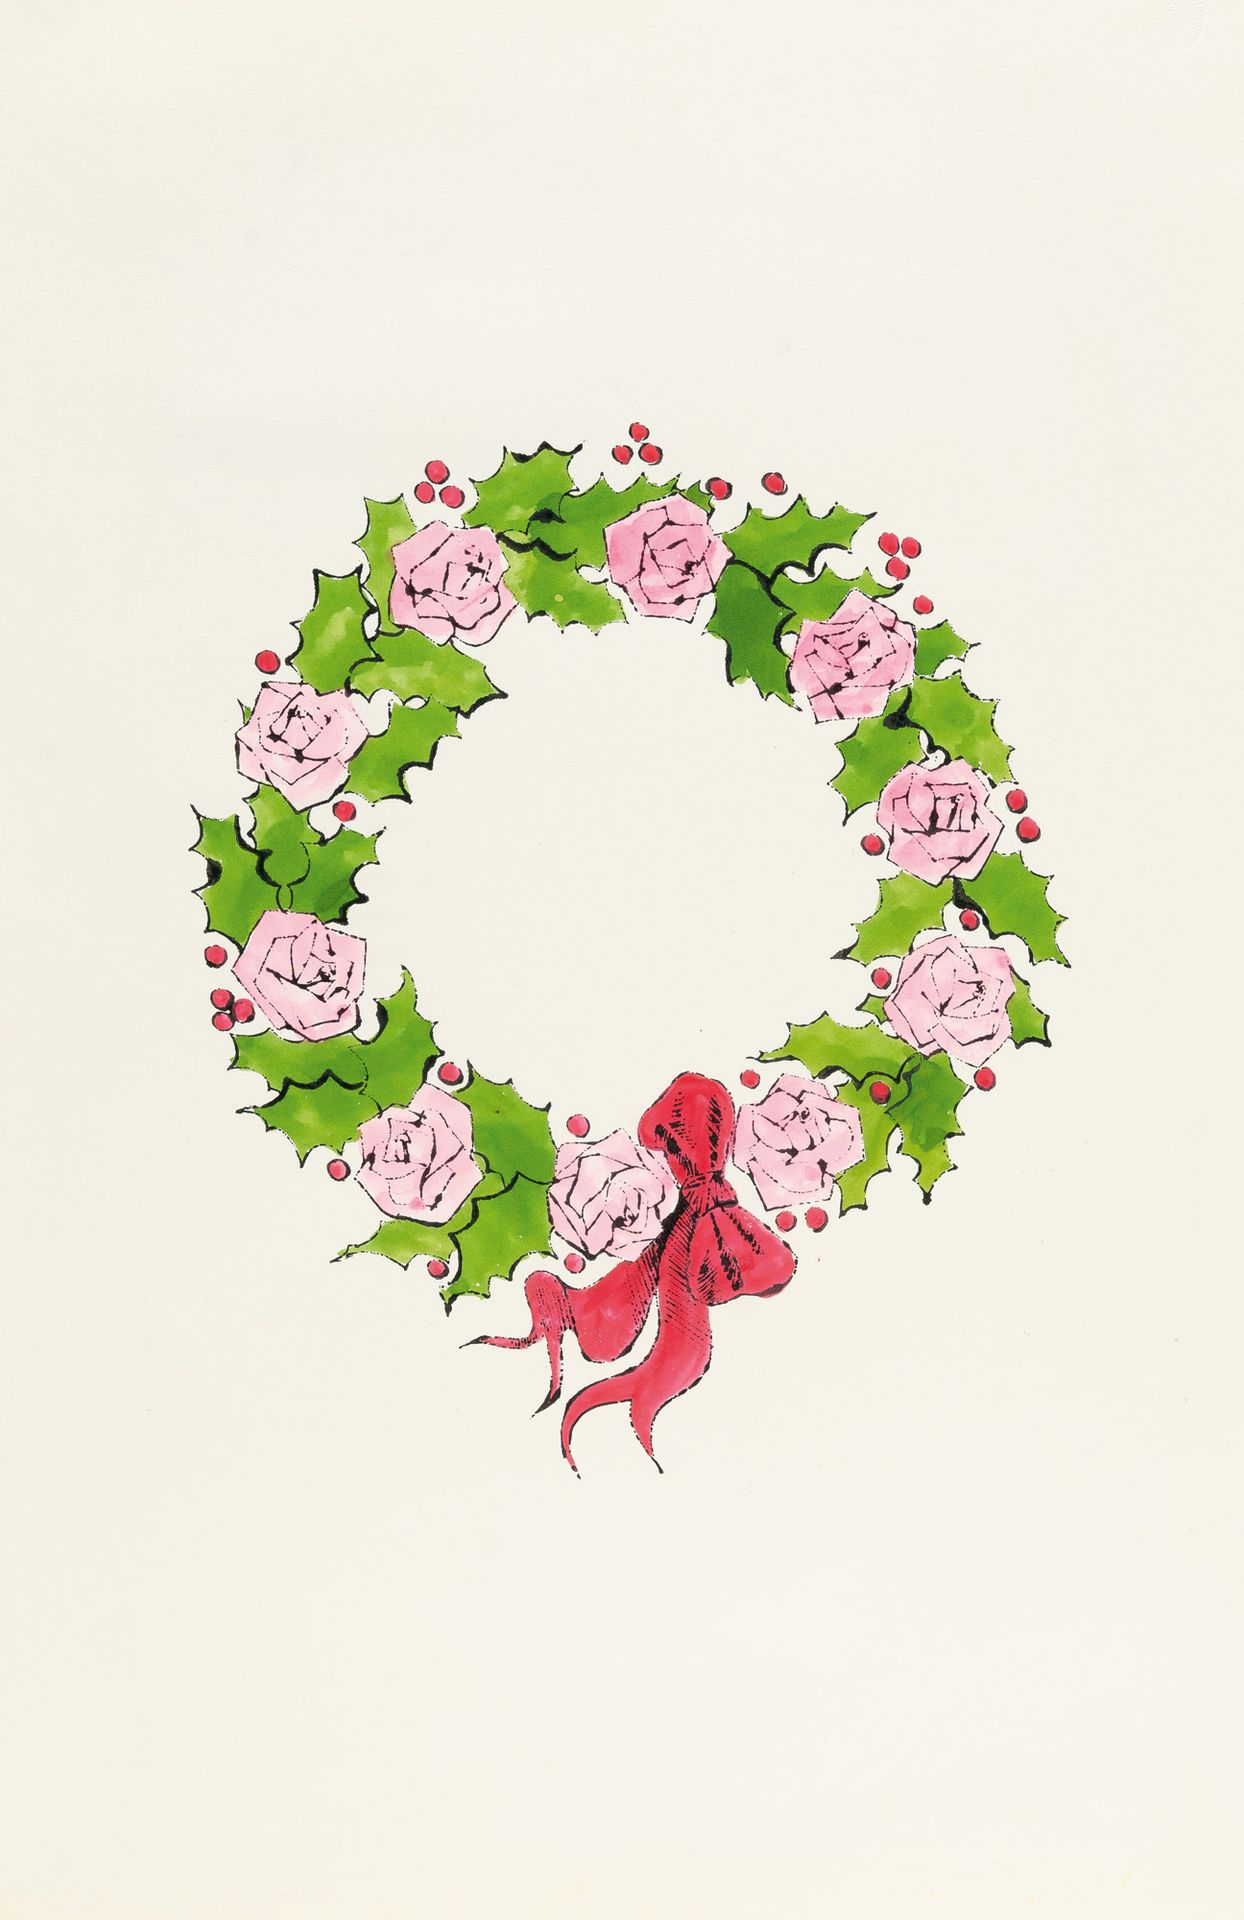 Andy WARHOL Andy Warhol, Christmas-wreath with roses.

Indian ink and watercolou&hellip;